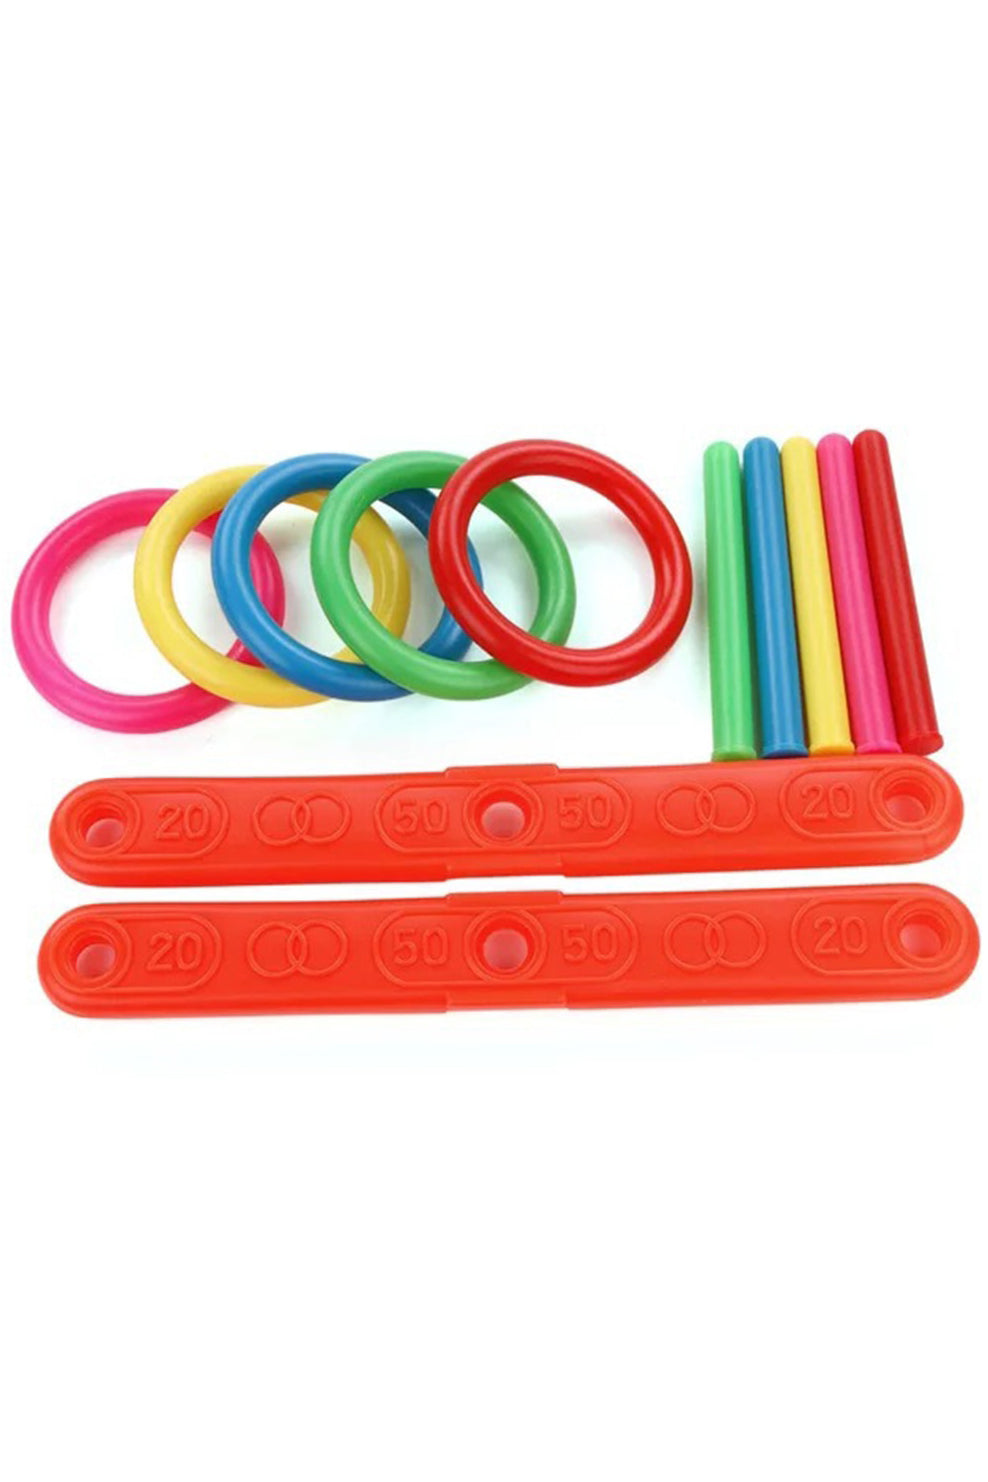 Ring Toss Game Set - Little Learners Toys